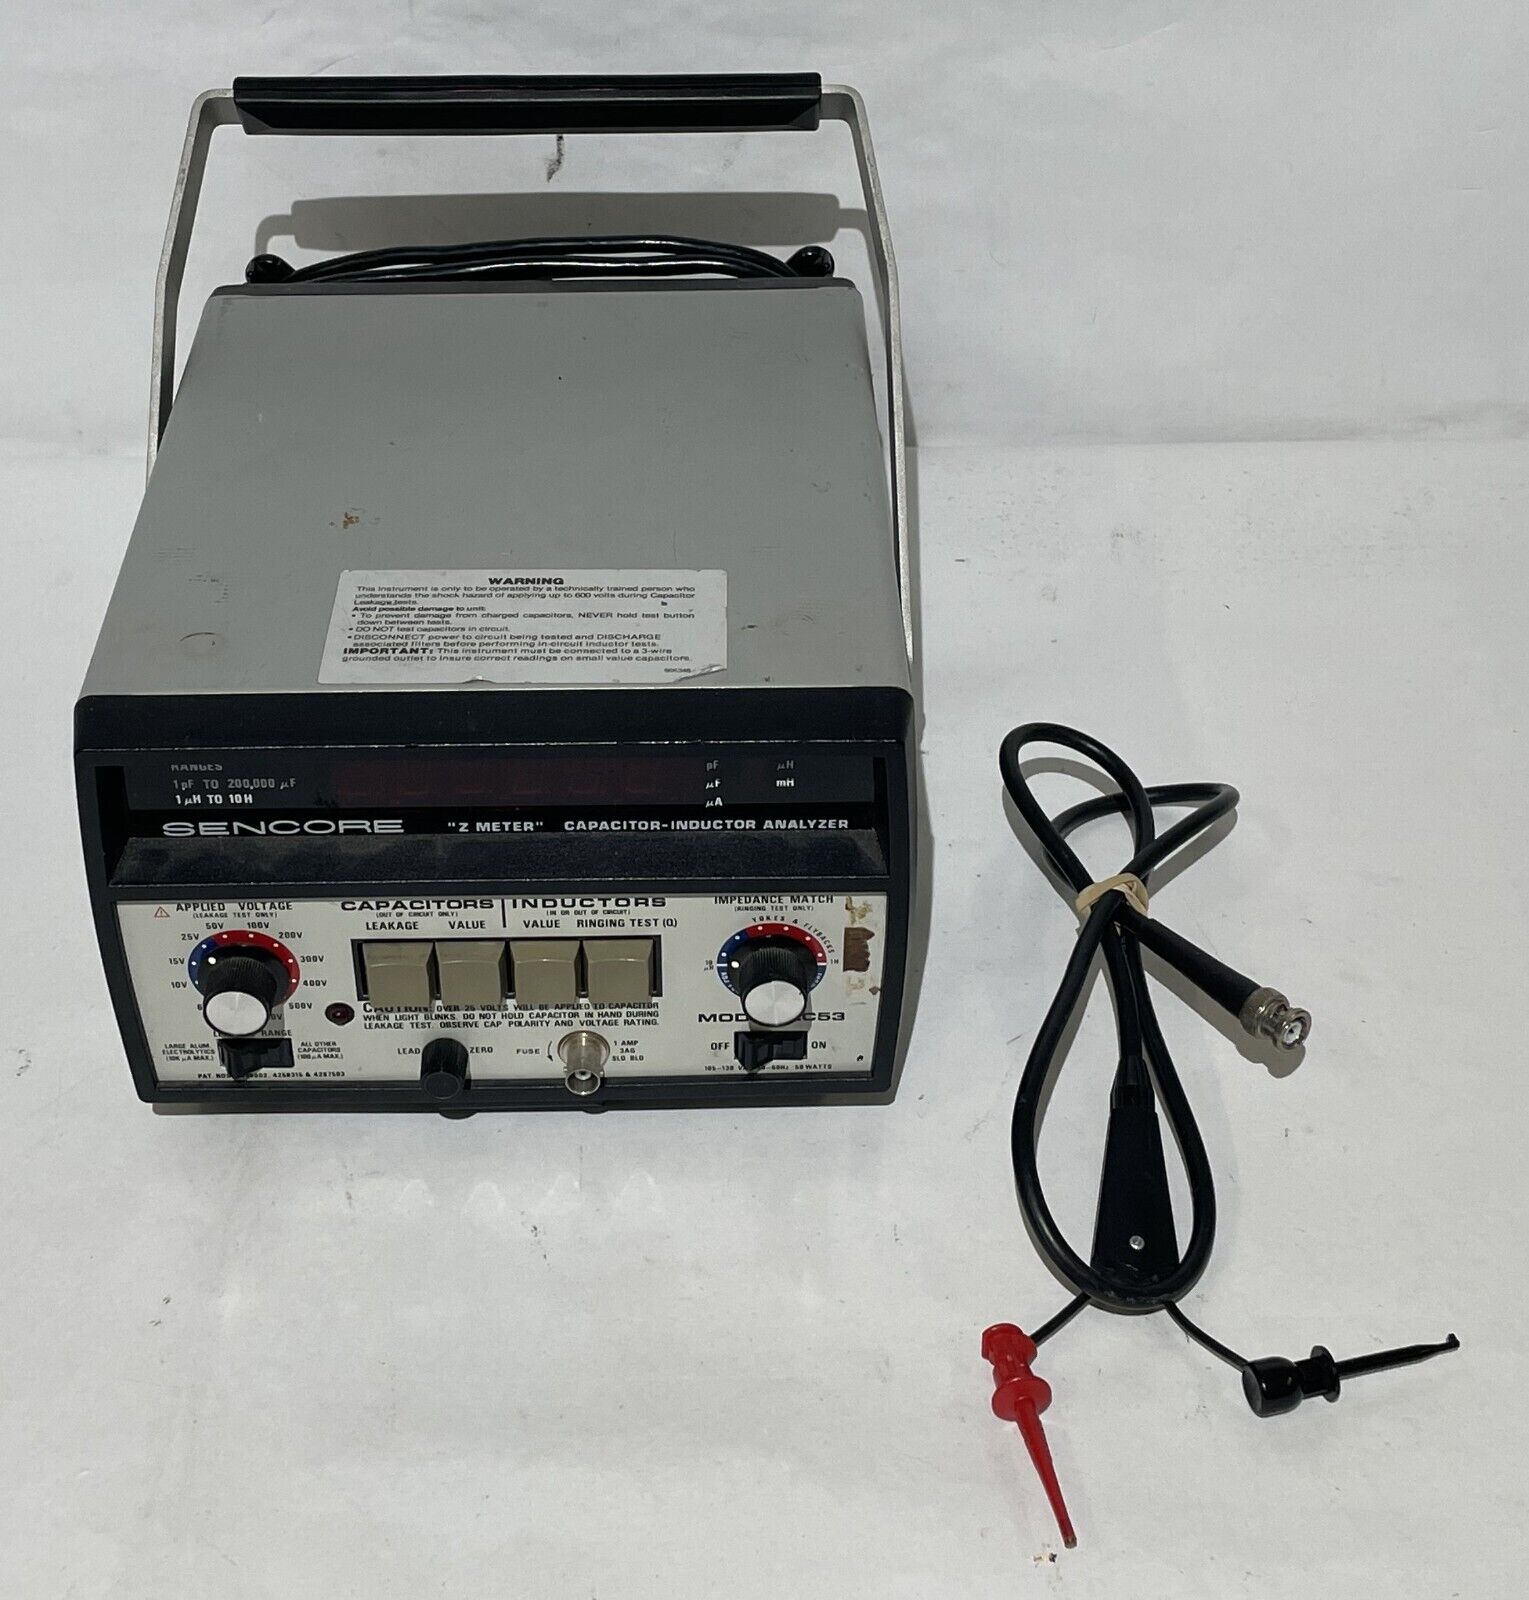 Sencore LC53 Z Meter Capacitor Inductor Analyzer - Tested